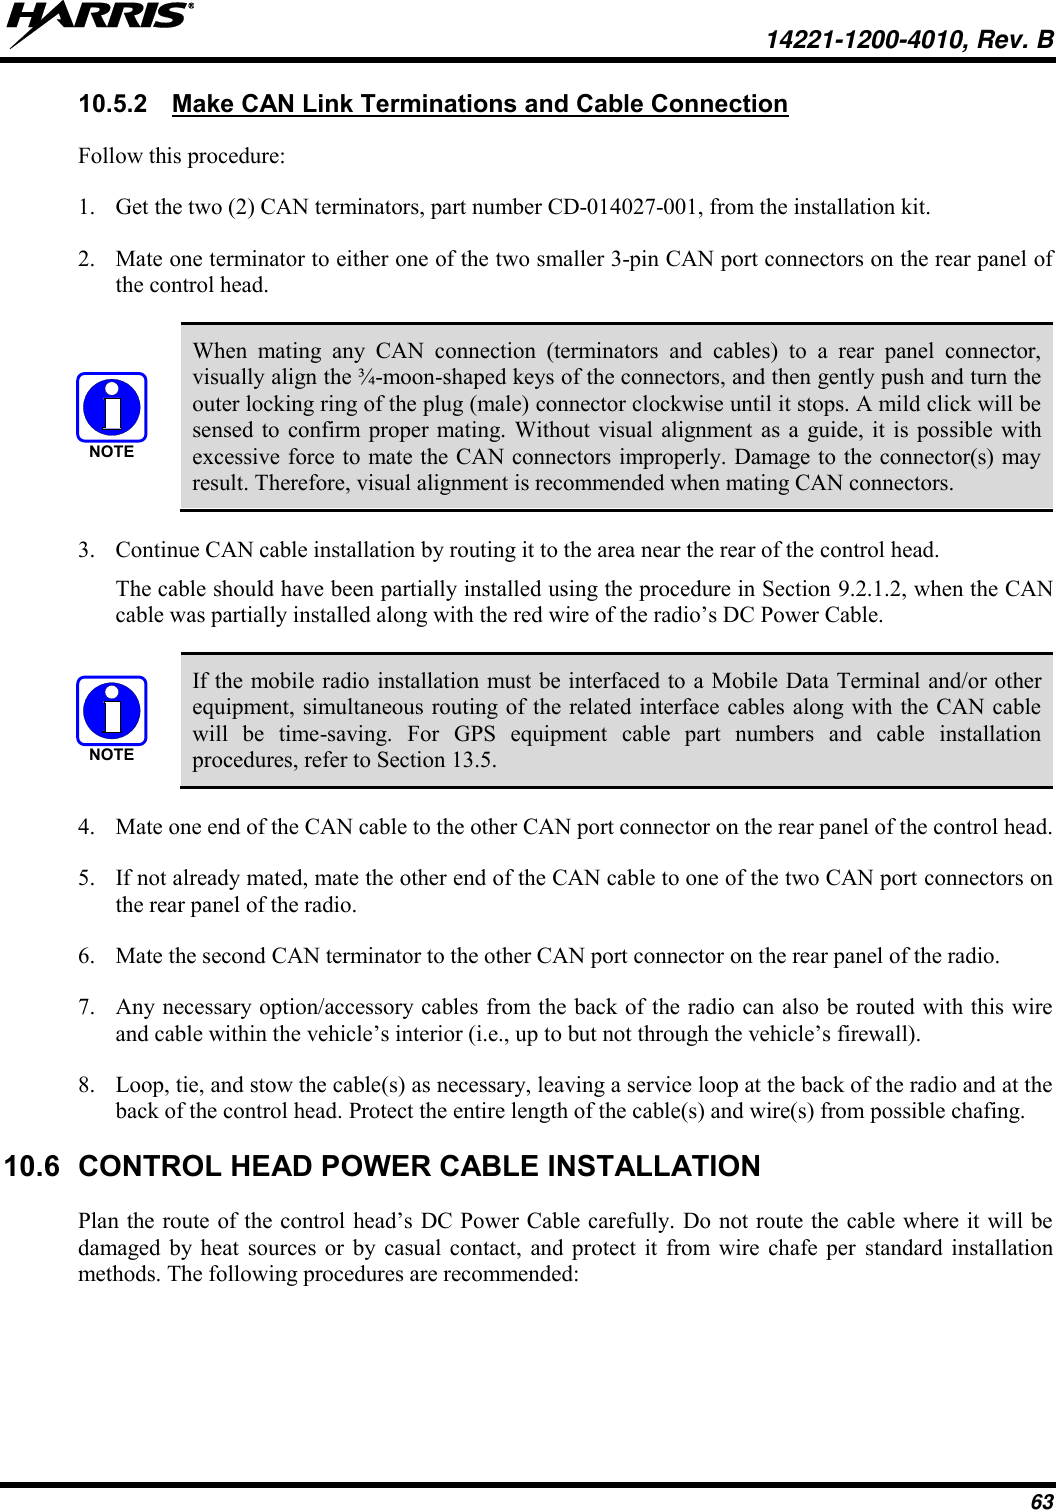   14221-1200-4010, Rev. B 63 10.5.2  Make CAN Link Terminations and Cable Connection Follow this procedure: 1. Get the two (2) CAN terminators, part number CD-014027-001, from the installation kit. 2. Mate one terminator to either one of the two smaller 3-pin CAN port connectors on the rear panel of the control head.    When  mating  any  CAN  connection  (terminators  and  cables)  to  a  rear  panel  connector, visually align the ¾-moon-shaped keys of the connectors, and then gently push and turn the outer locking ring of the plug (male) connector clockwise until it stops. A mild click will be sensed to  confirm proper mating. Without visual alignment as  a  guide, it  is possible  with excessive force to mate the CAN connectors improperly. Damage to the connector(s) may result. Therefore, visual alignment is recommended when mating CAN connectors. 3. Continue CAN cable installation by routing it to the area near the rear of the control head.   The cable should have been partially installed using the procedure in Section 9.2.1.2, when the CAN cable was partially installed along with the red wire of the radio’s DC Power Cable.   If the mobile radio installation must be interfaced to a Mobile Data Terminal and/or other equipment, simultaneous routing of the related interface cables along with the CAN cable will  be  time-saving.  For  GPS  equipment  cable  part  numbers  and  cable  installation procedures, refer to Section 13.5. 4. Mate one end of the CAN cable to the other CAN port connector on the rear panel of the control head. 5. If not already mated, mate the other end of the CAN cable to one of the two CAN port connectors on the rear panel of the radio. 6. Mate the second CAN terminator to the other CAN port connector on the rear panel of the radio. 7. Any necessary option/accessory cables from the back of the radio can also be routed with this wire and cable within the vehicle’s interior (i.e., up to but not through the vehicle’s firewall). 8. Loop, tie, and stow the cable(s) as necessary, leaving a service loop at the back of the radio and at the back of the control head. Protect the entire length of the cable(s) and wire(s) from possible chafing. 10.6  CONTROL HEAD POWER CABLE INSTALLATION Plan the route of the control head’s DC Power Cable carefully. Do not route the cable where it will be damaged  by  heat  sources or  by  casual contact,  and  protect  it from  wire  chafe  per  standard  installation methods. The following procedures are recommended: NOTENOTE